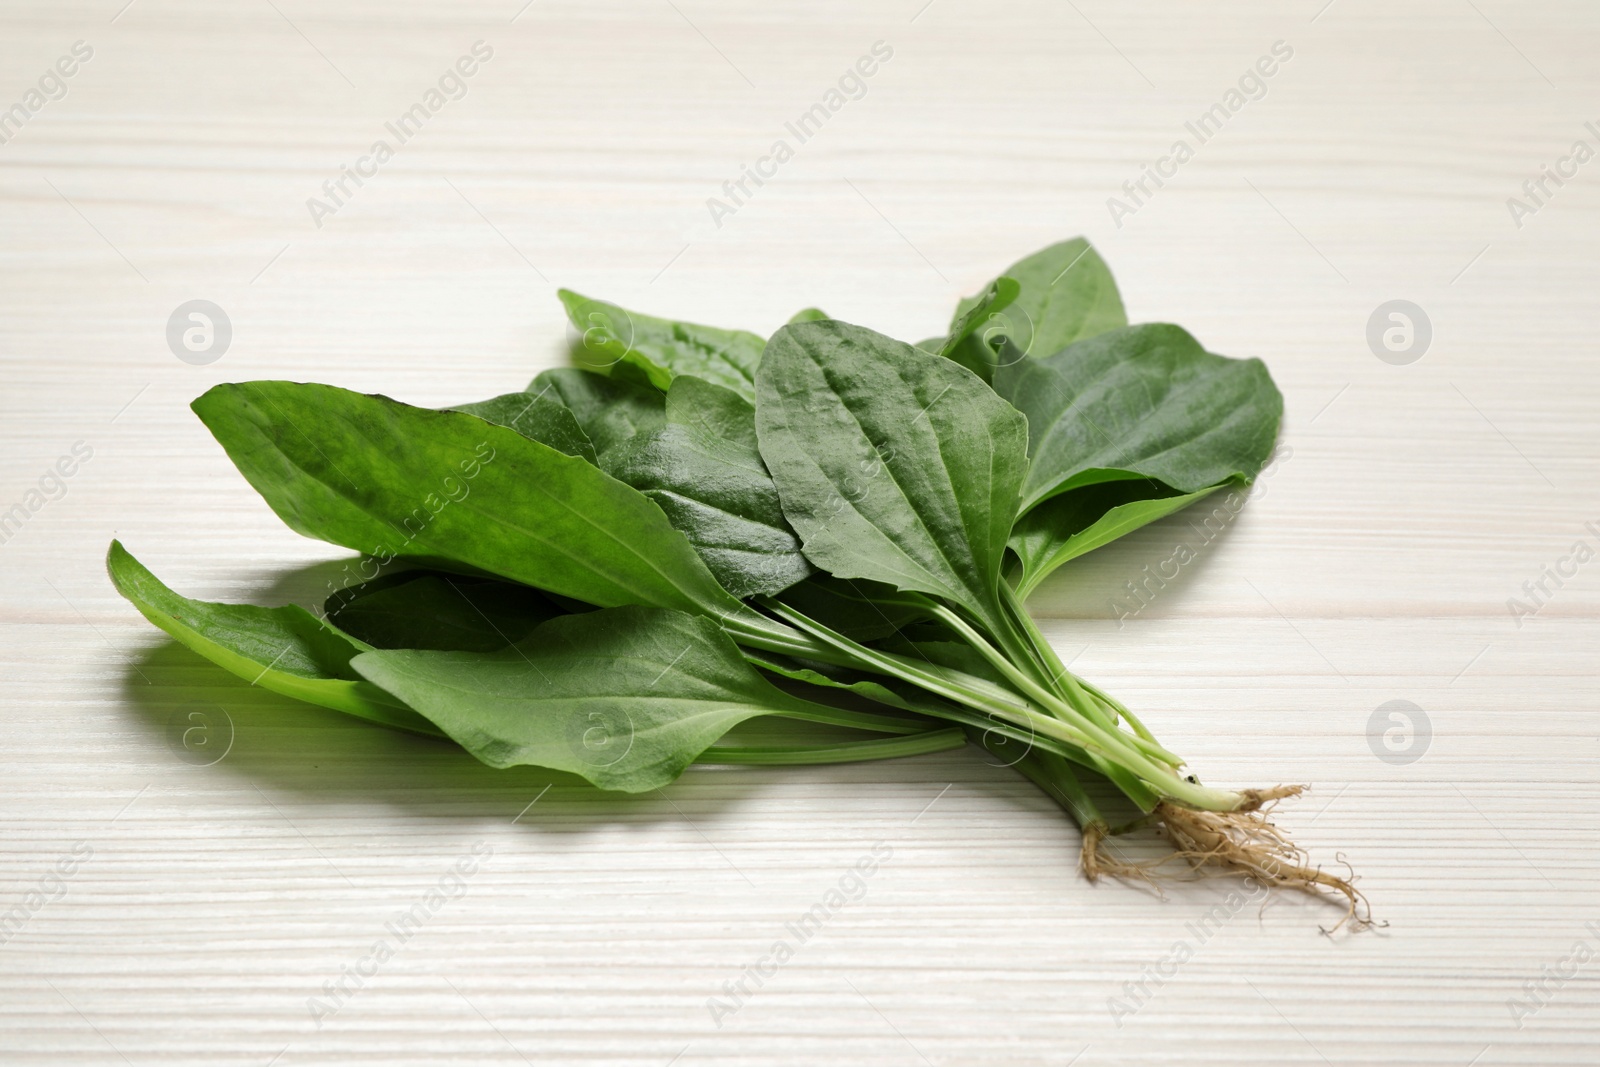 Photo of Broadleaf plantain leaves on white wooden table, closeup